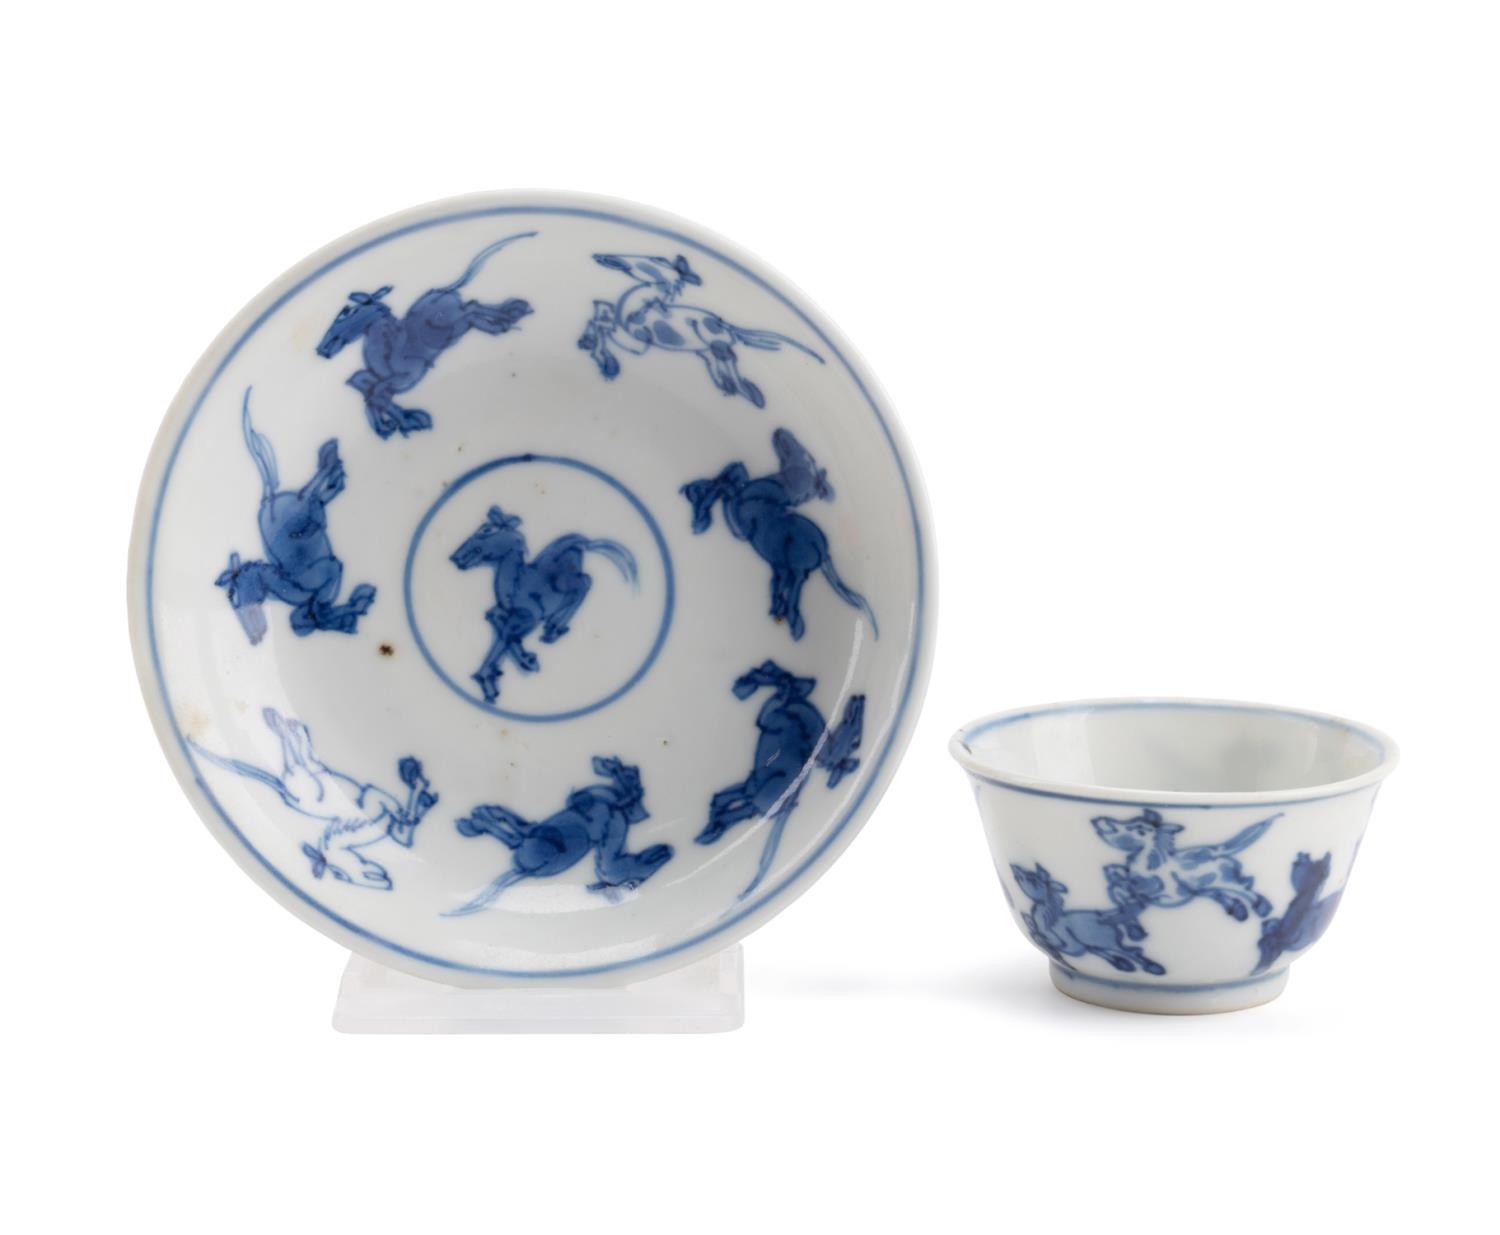 CHINESE 8 HORSES BLUE WHITE CUP 3b410b